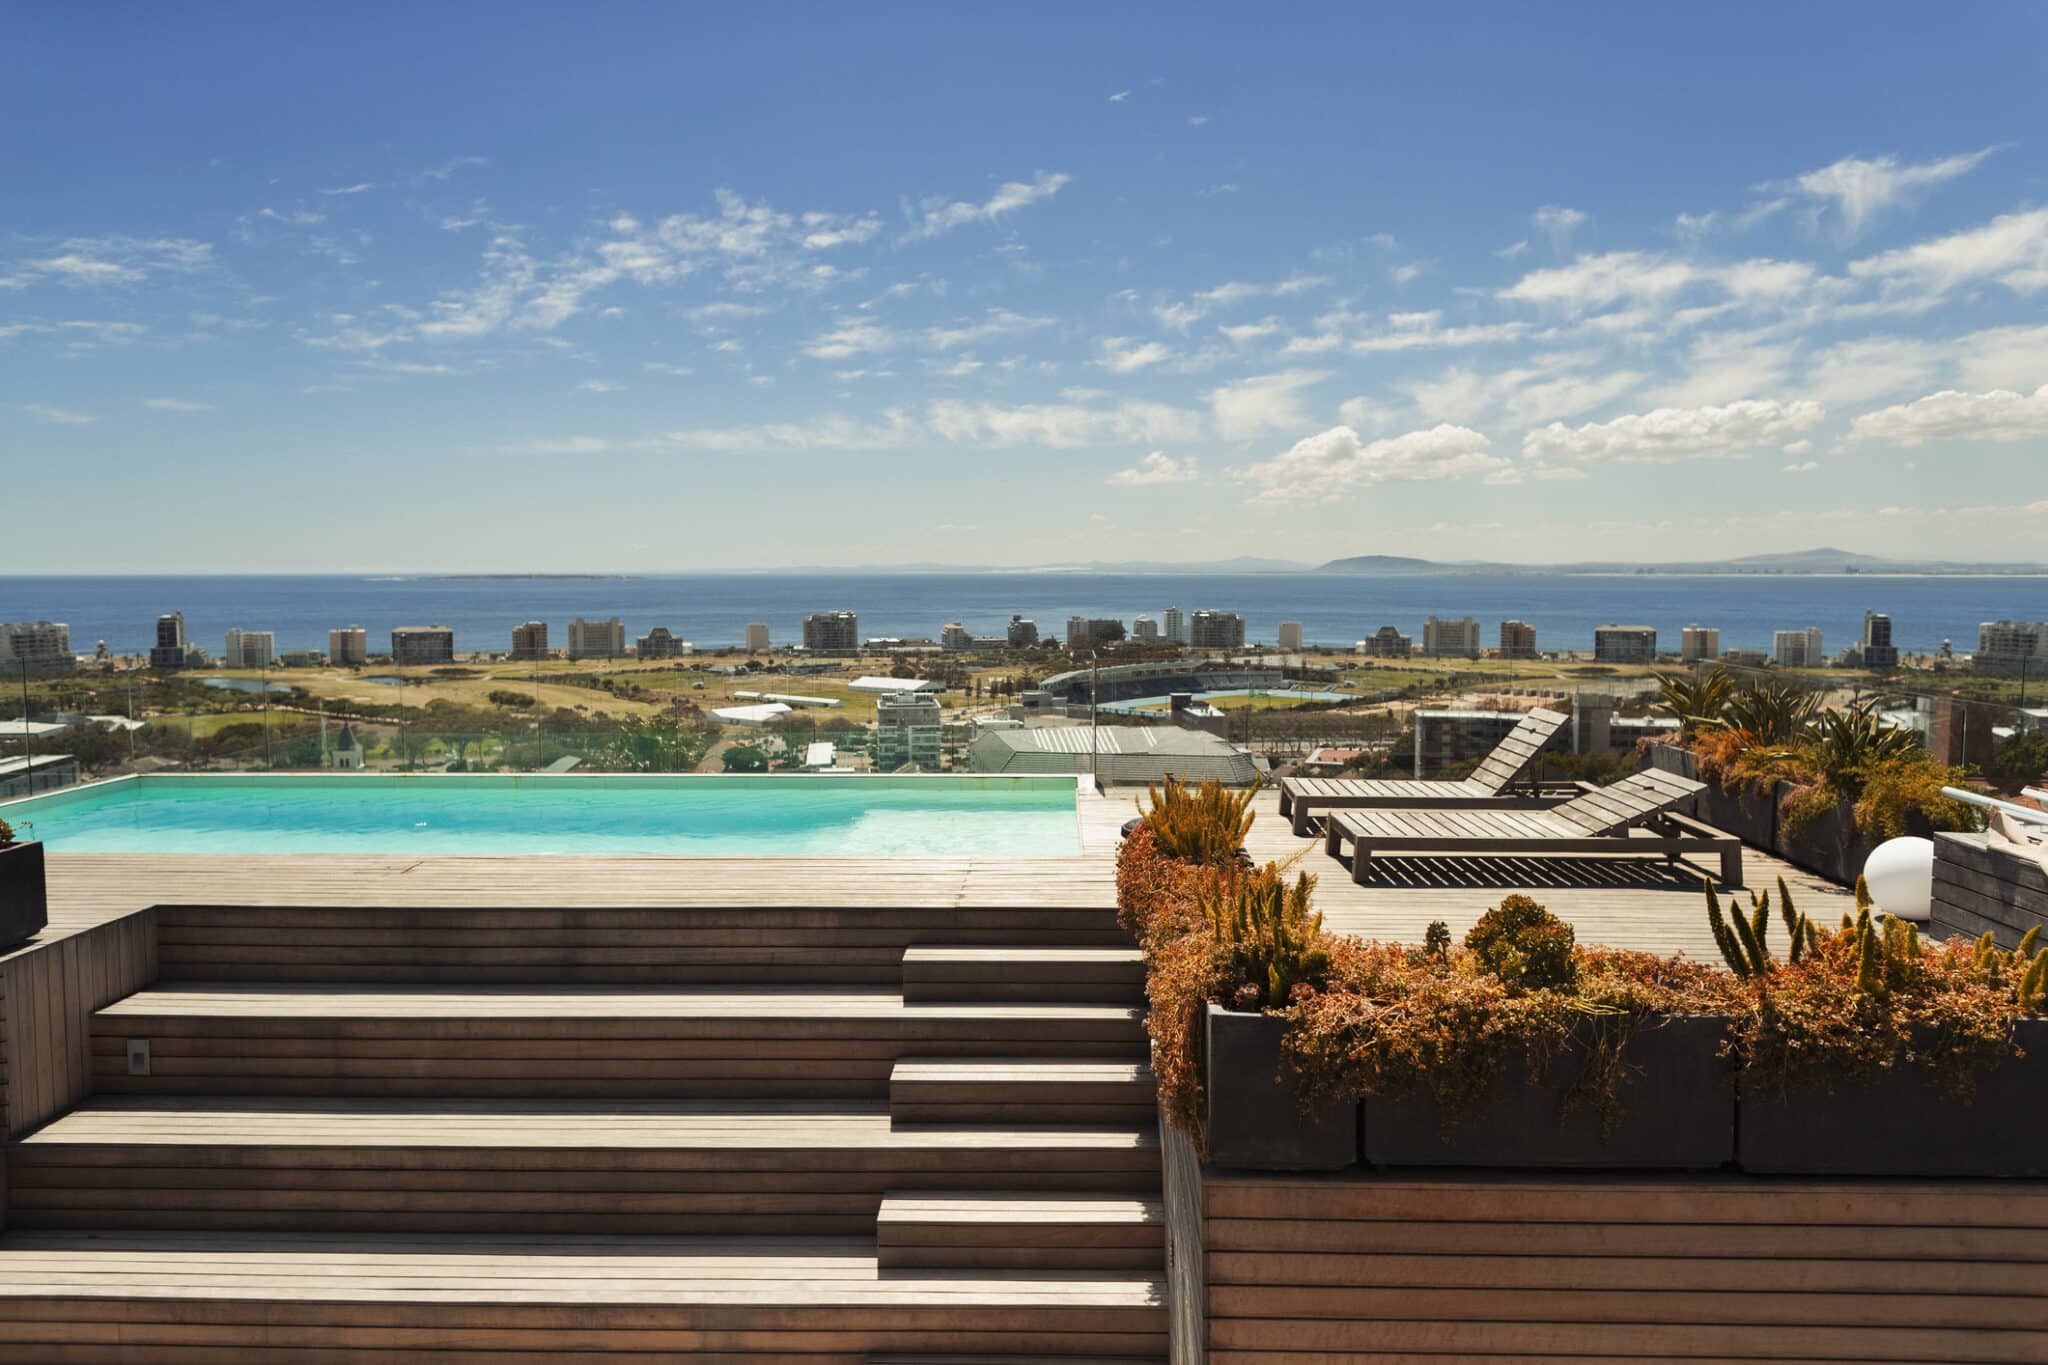 Sunny, modern rooftop swimming pool with ocean view, Cape Town, South Africa